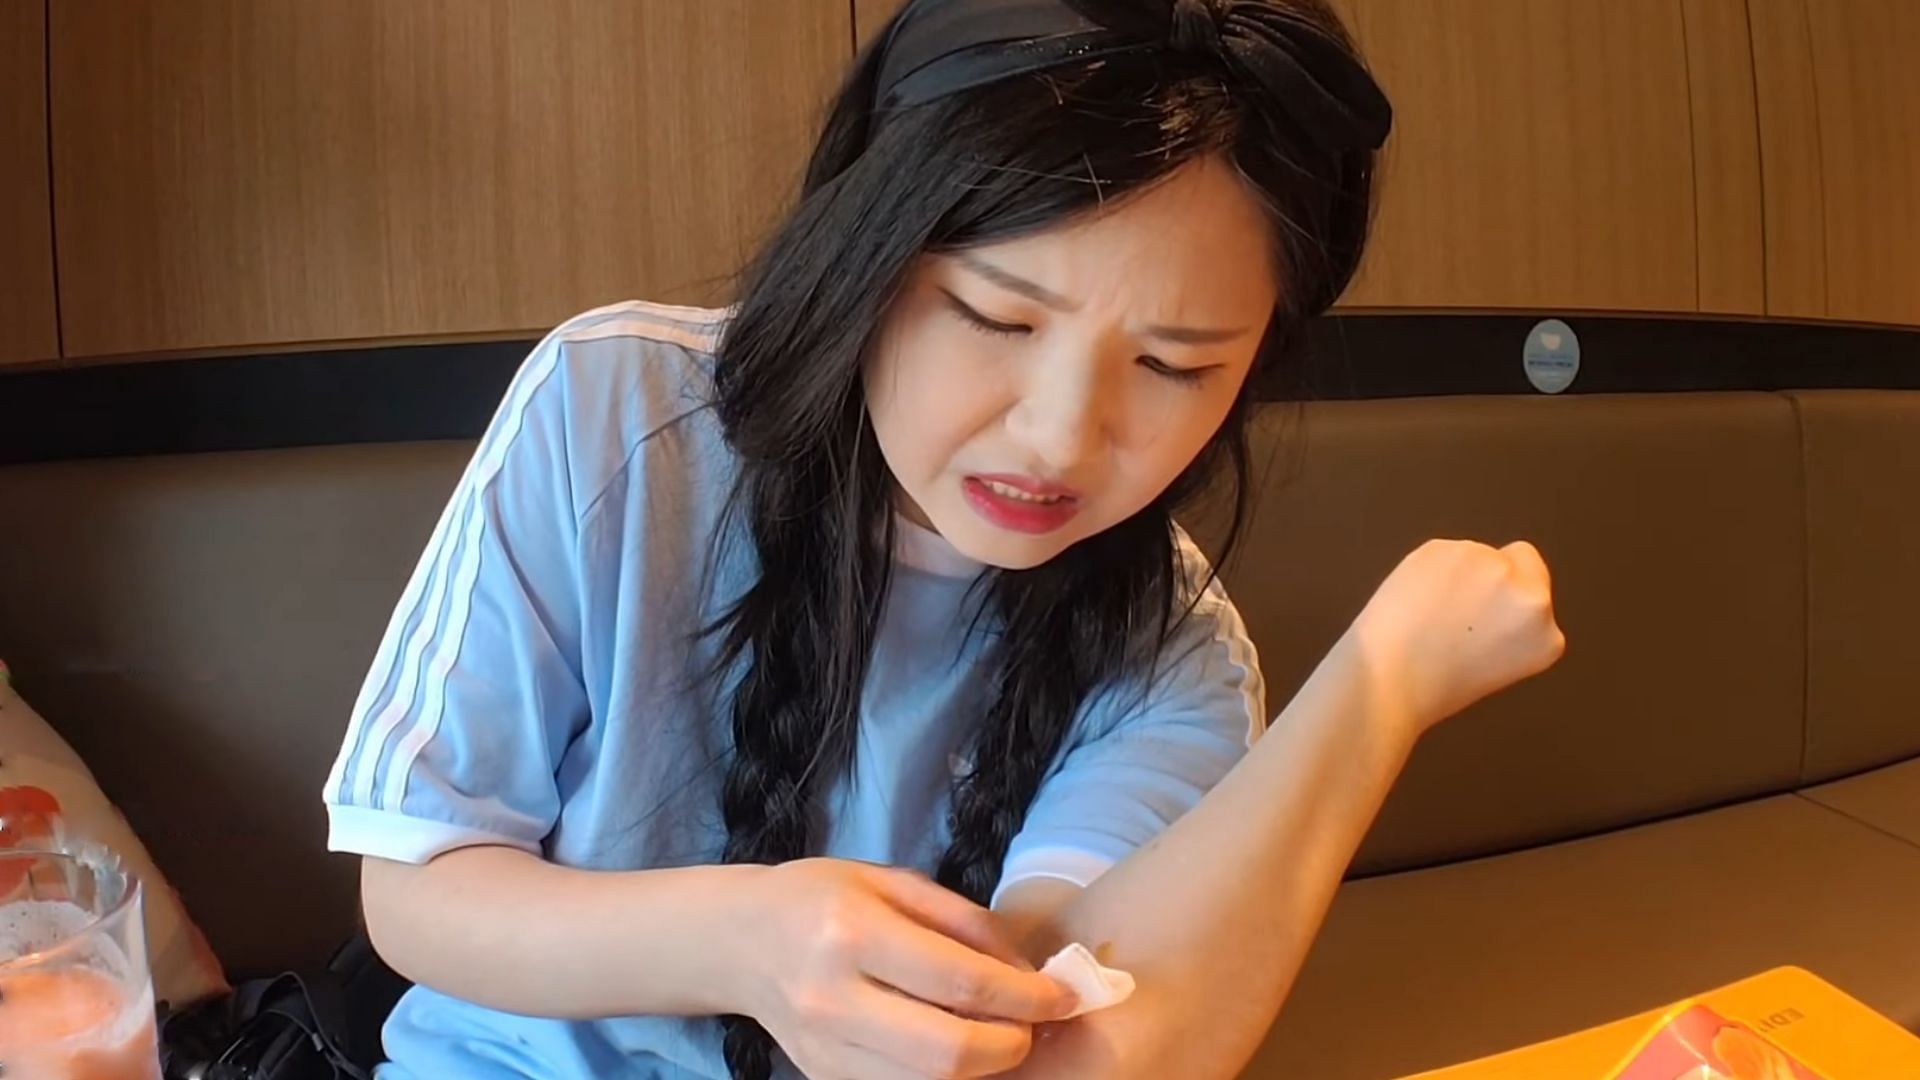 HAchubby tends to her wounds after crashing her bike (Image via HAchubby VODs/ YouTube)